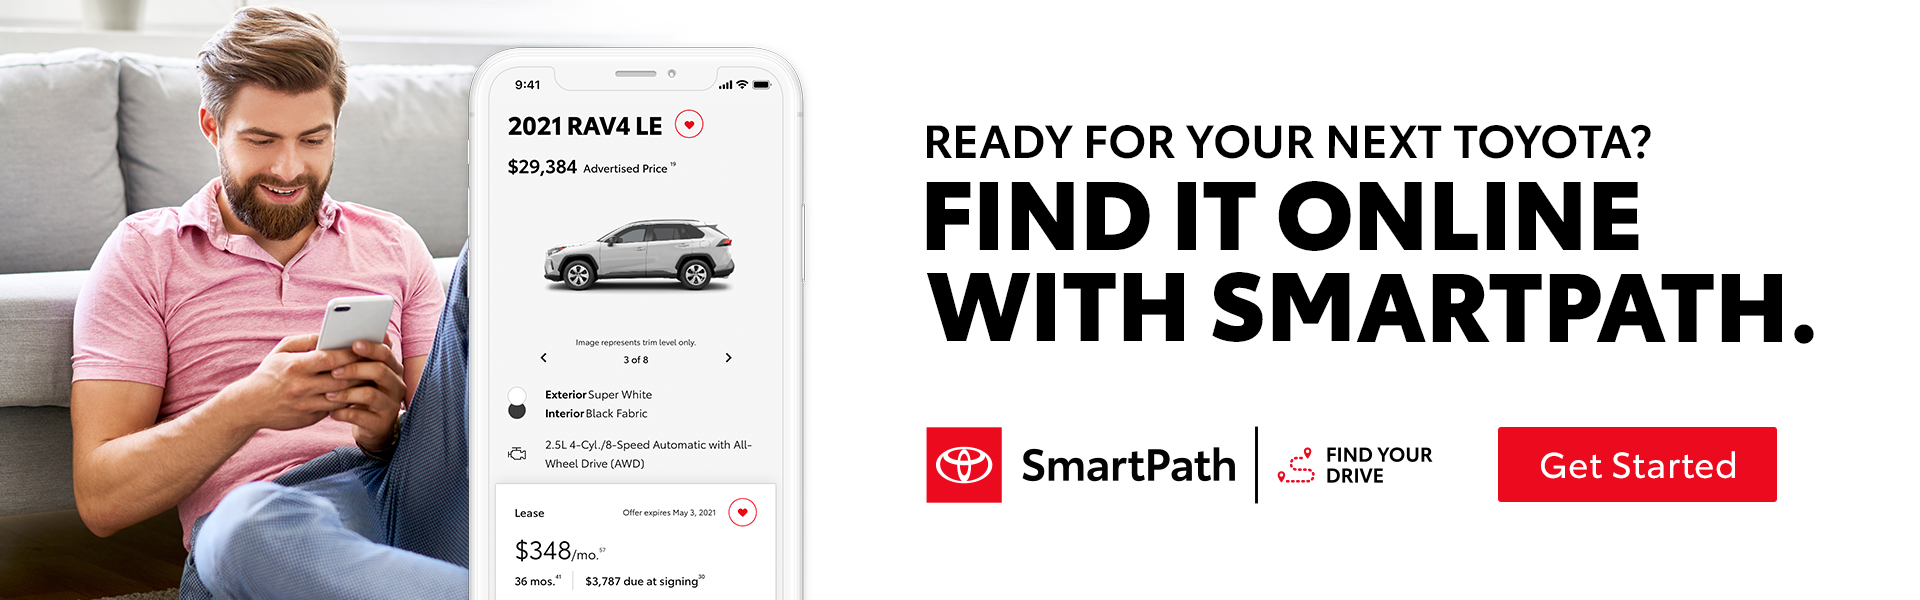 SP Banner Package - Find It Online with Smartpath.zip